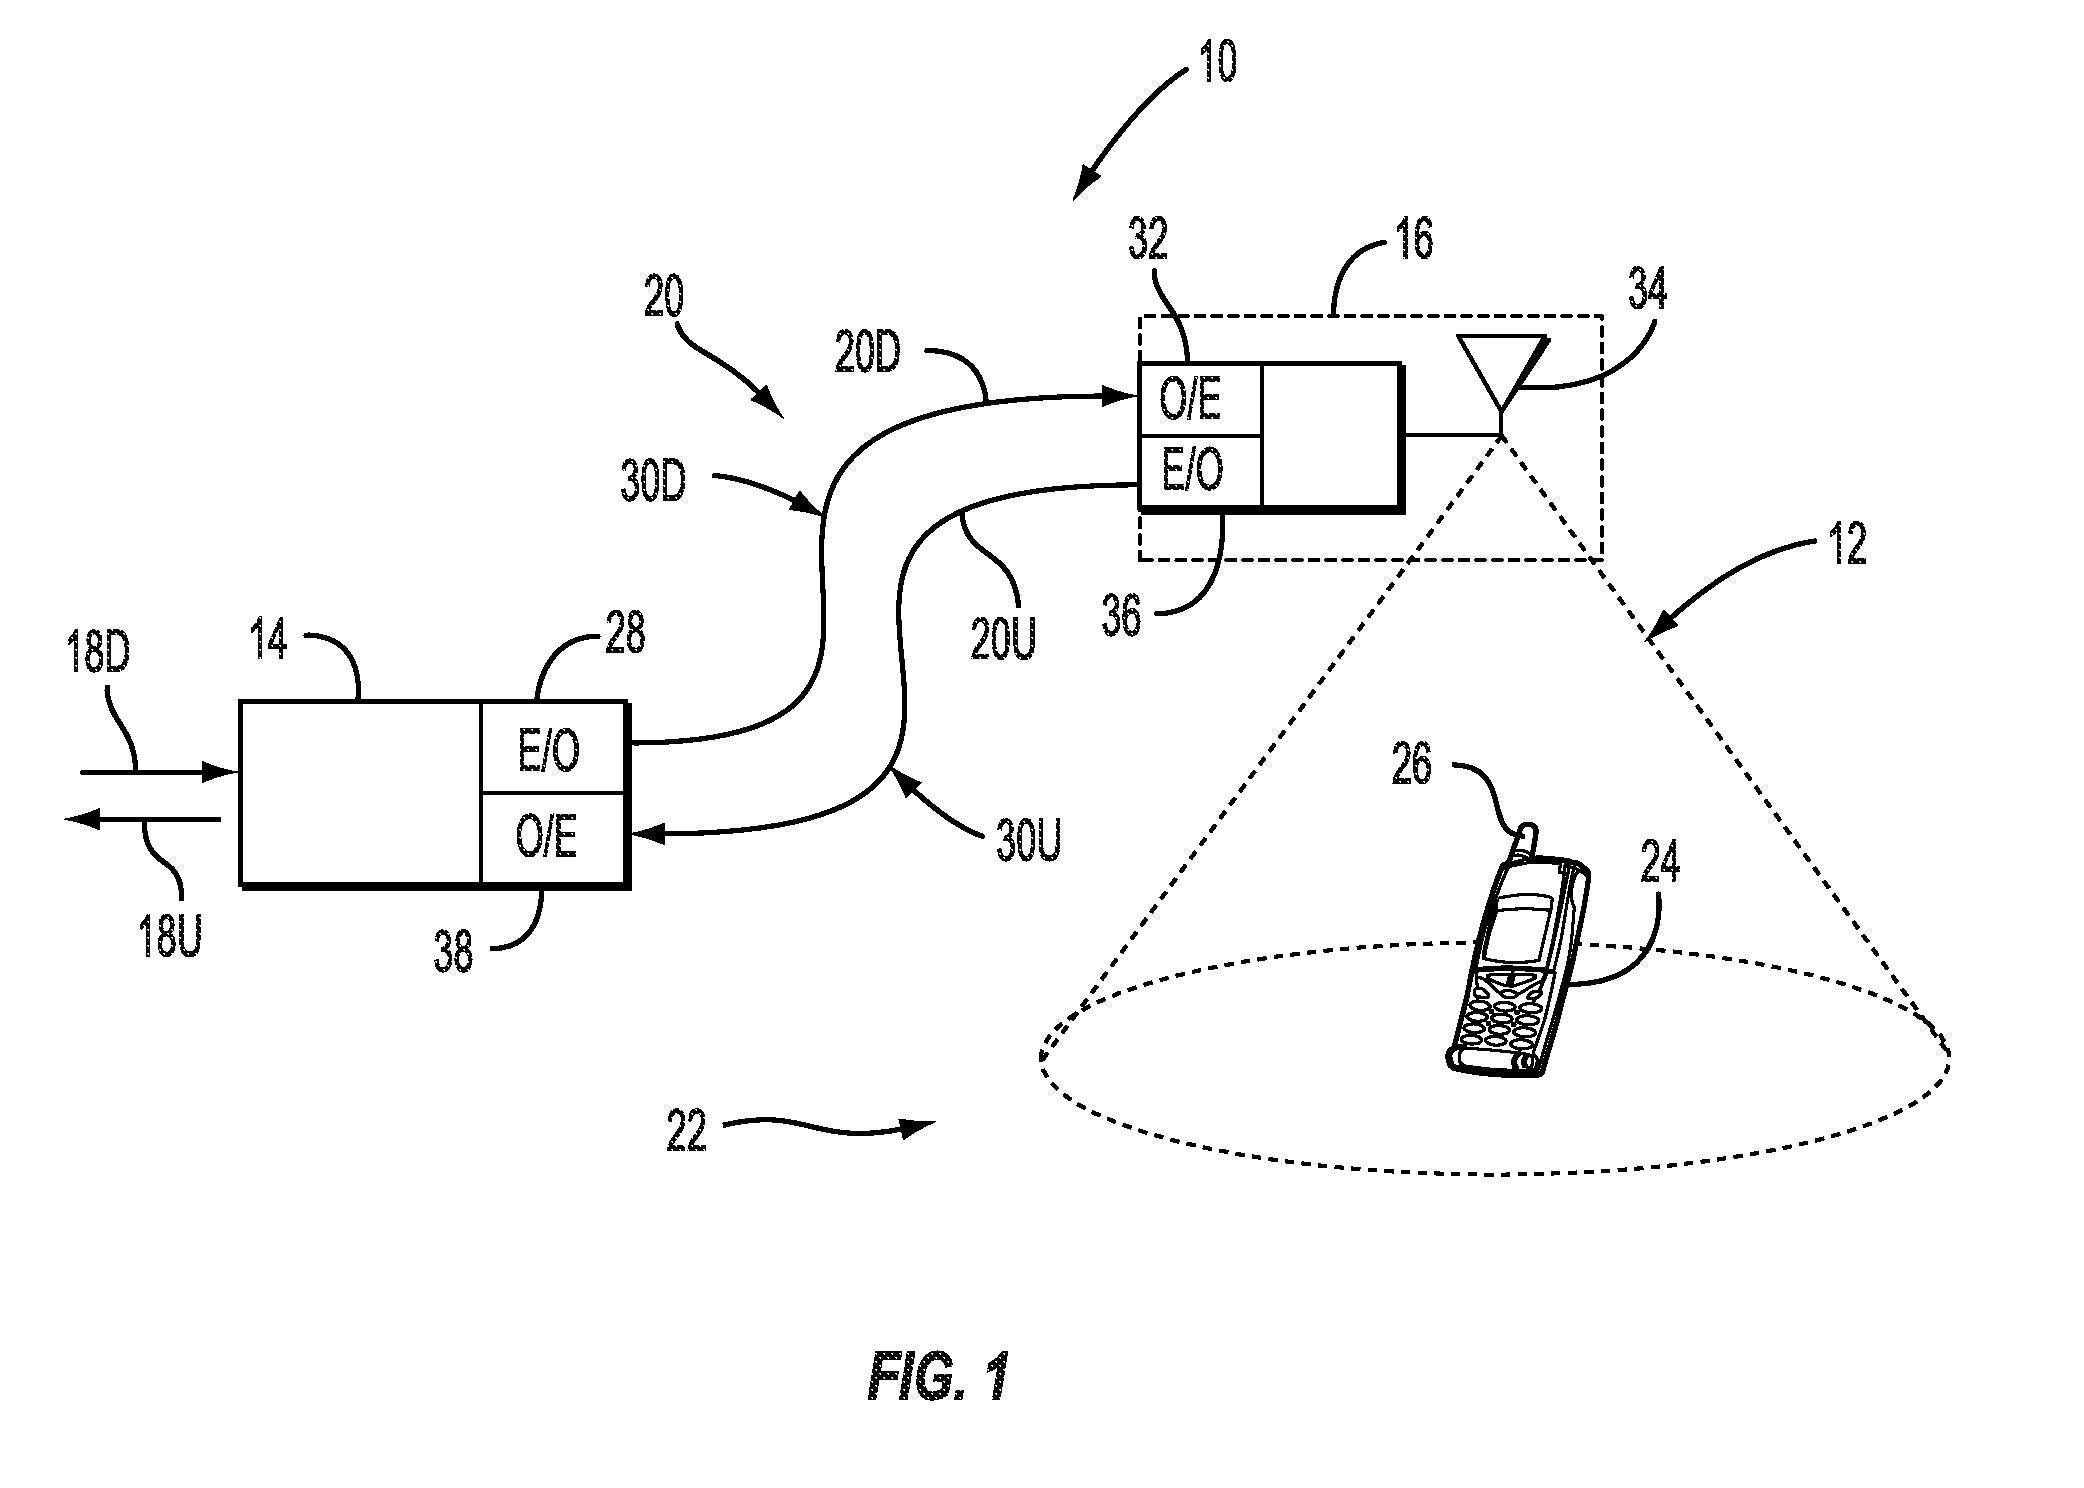 Providing simultaneous digital and analog services and optical fiber-based distributed antenna systems, and related components and methods